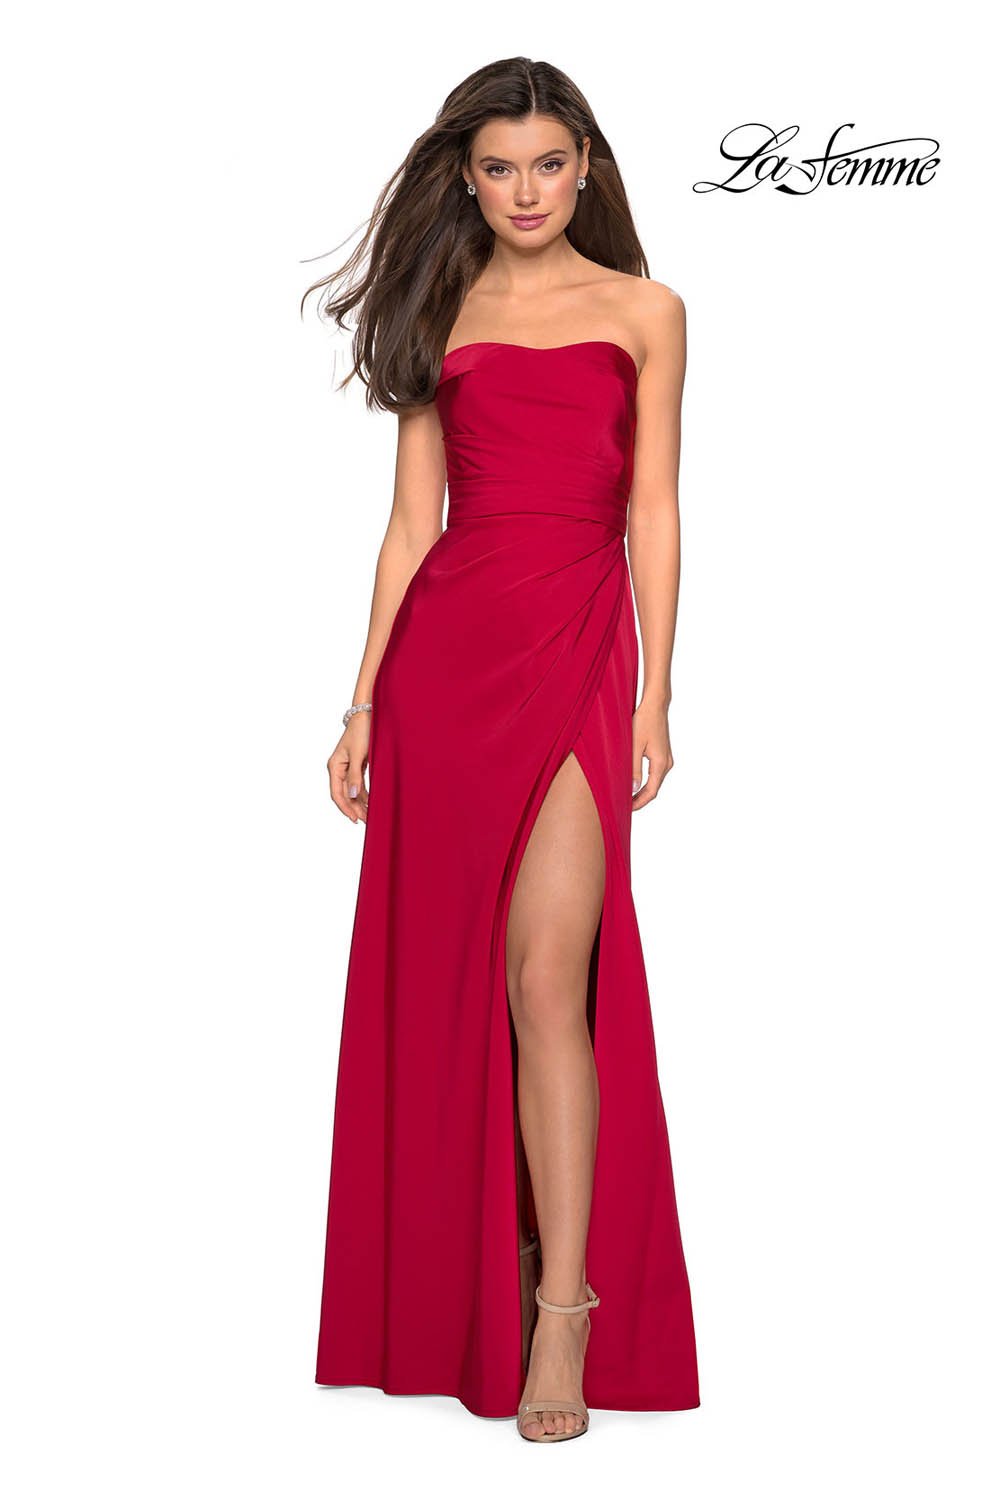 La Femme 26794 dress images in these colors: Blush, Burgundy, Sapphire Blue, Silver.